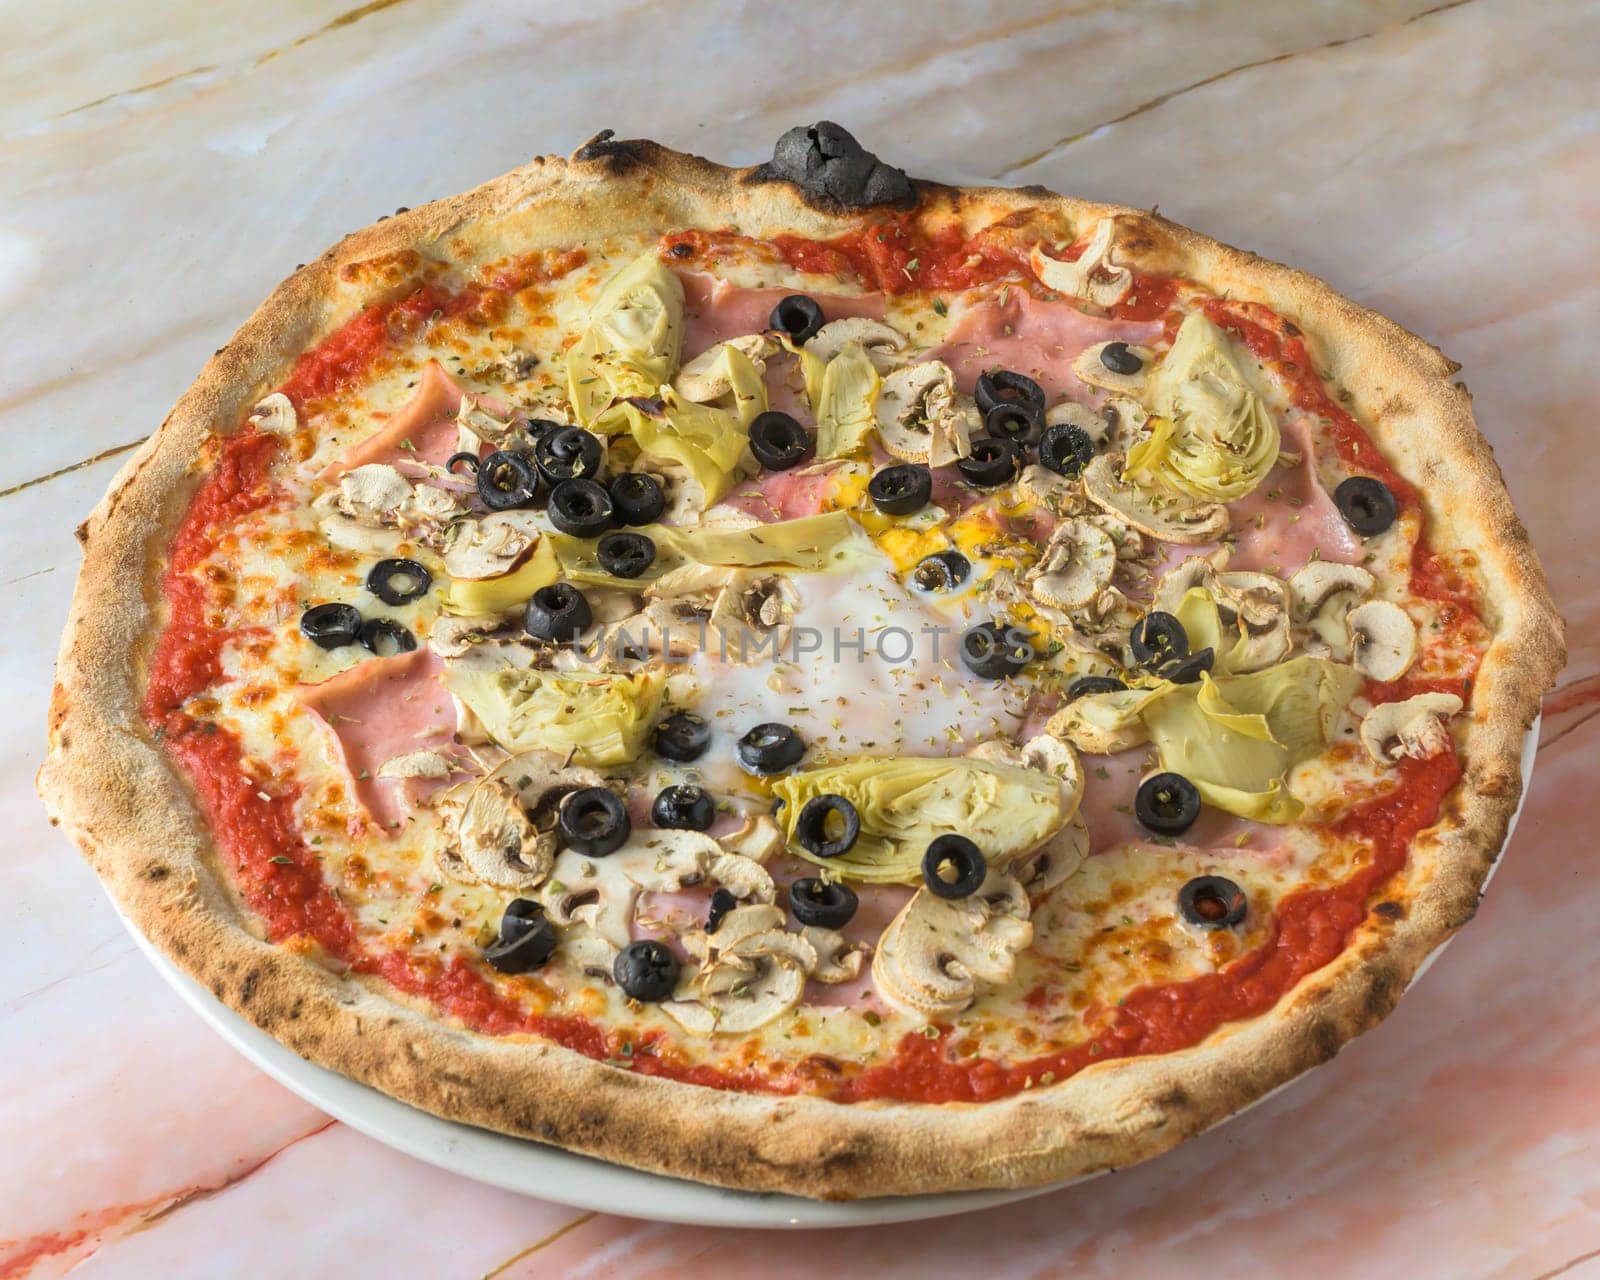 Capricciosa pizza with cheese, bacon, tomatoes, mushrooms and basil, italian meal. Baked neapolitan pizza with artichokes served on marble board.,